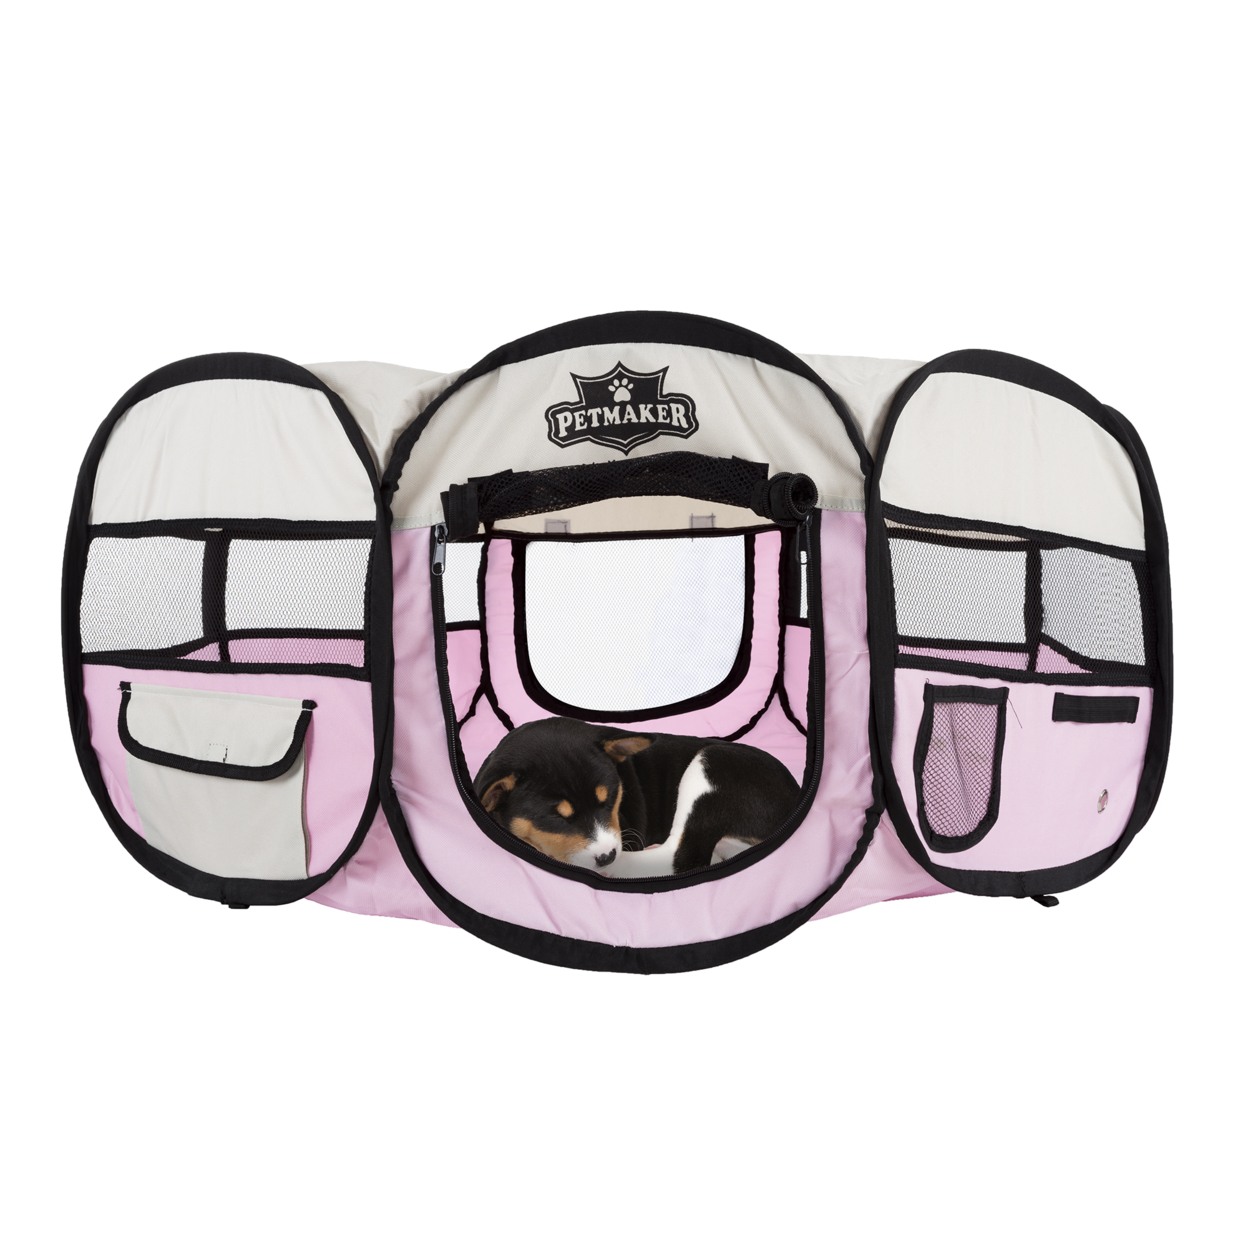 Portable Pop Up Pet Play Pen With Carrying Bag 33in Diameter X 15.5in Pink By PETMAKER